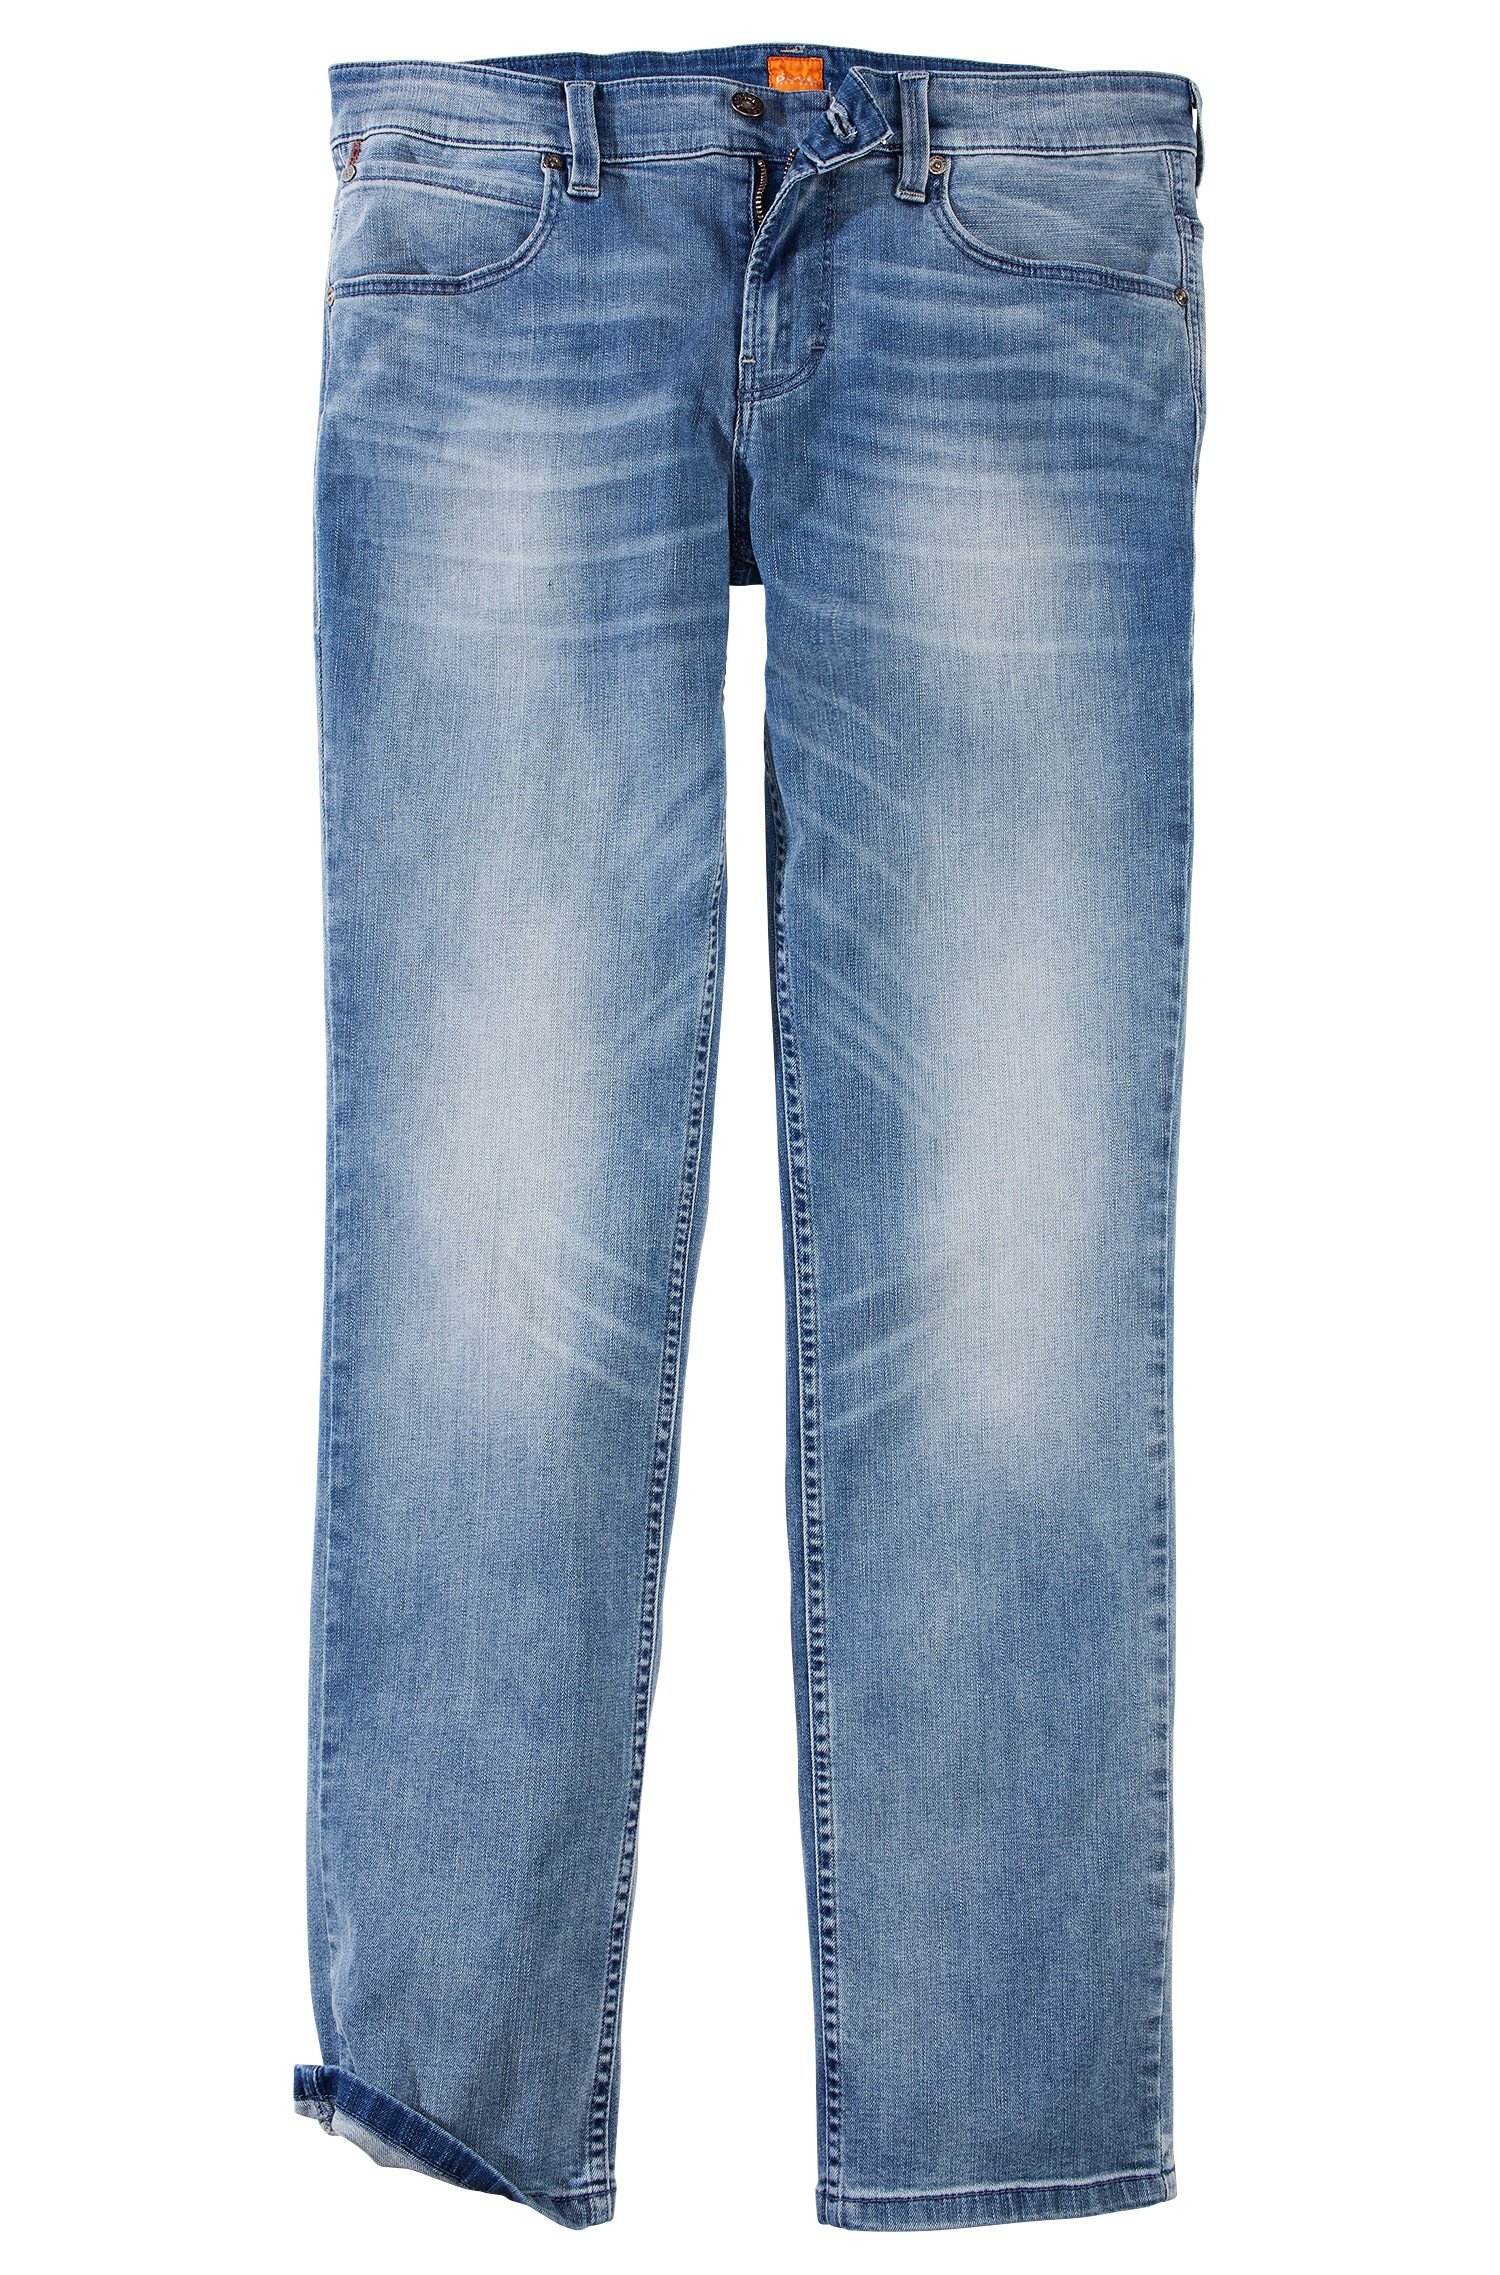 BOSS Orange 63' | Fit, Stretch Cotton Jeans in Blue for - Lyst